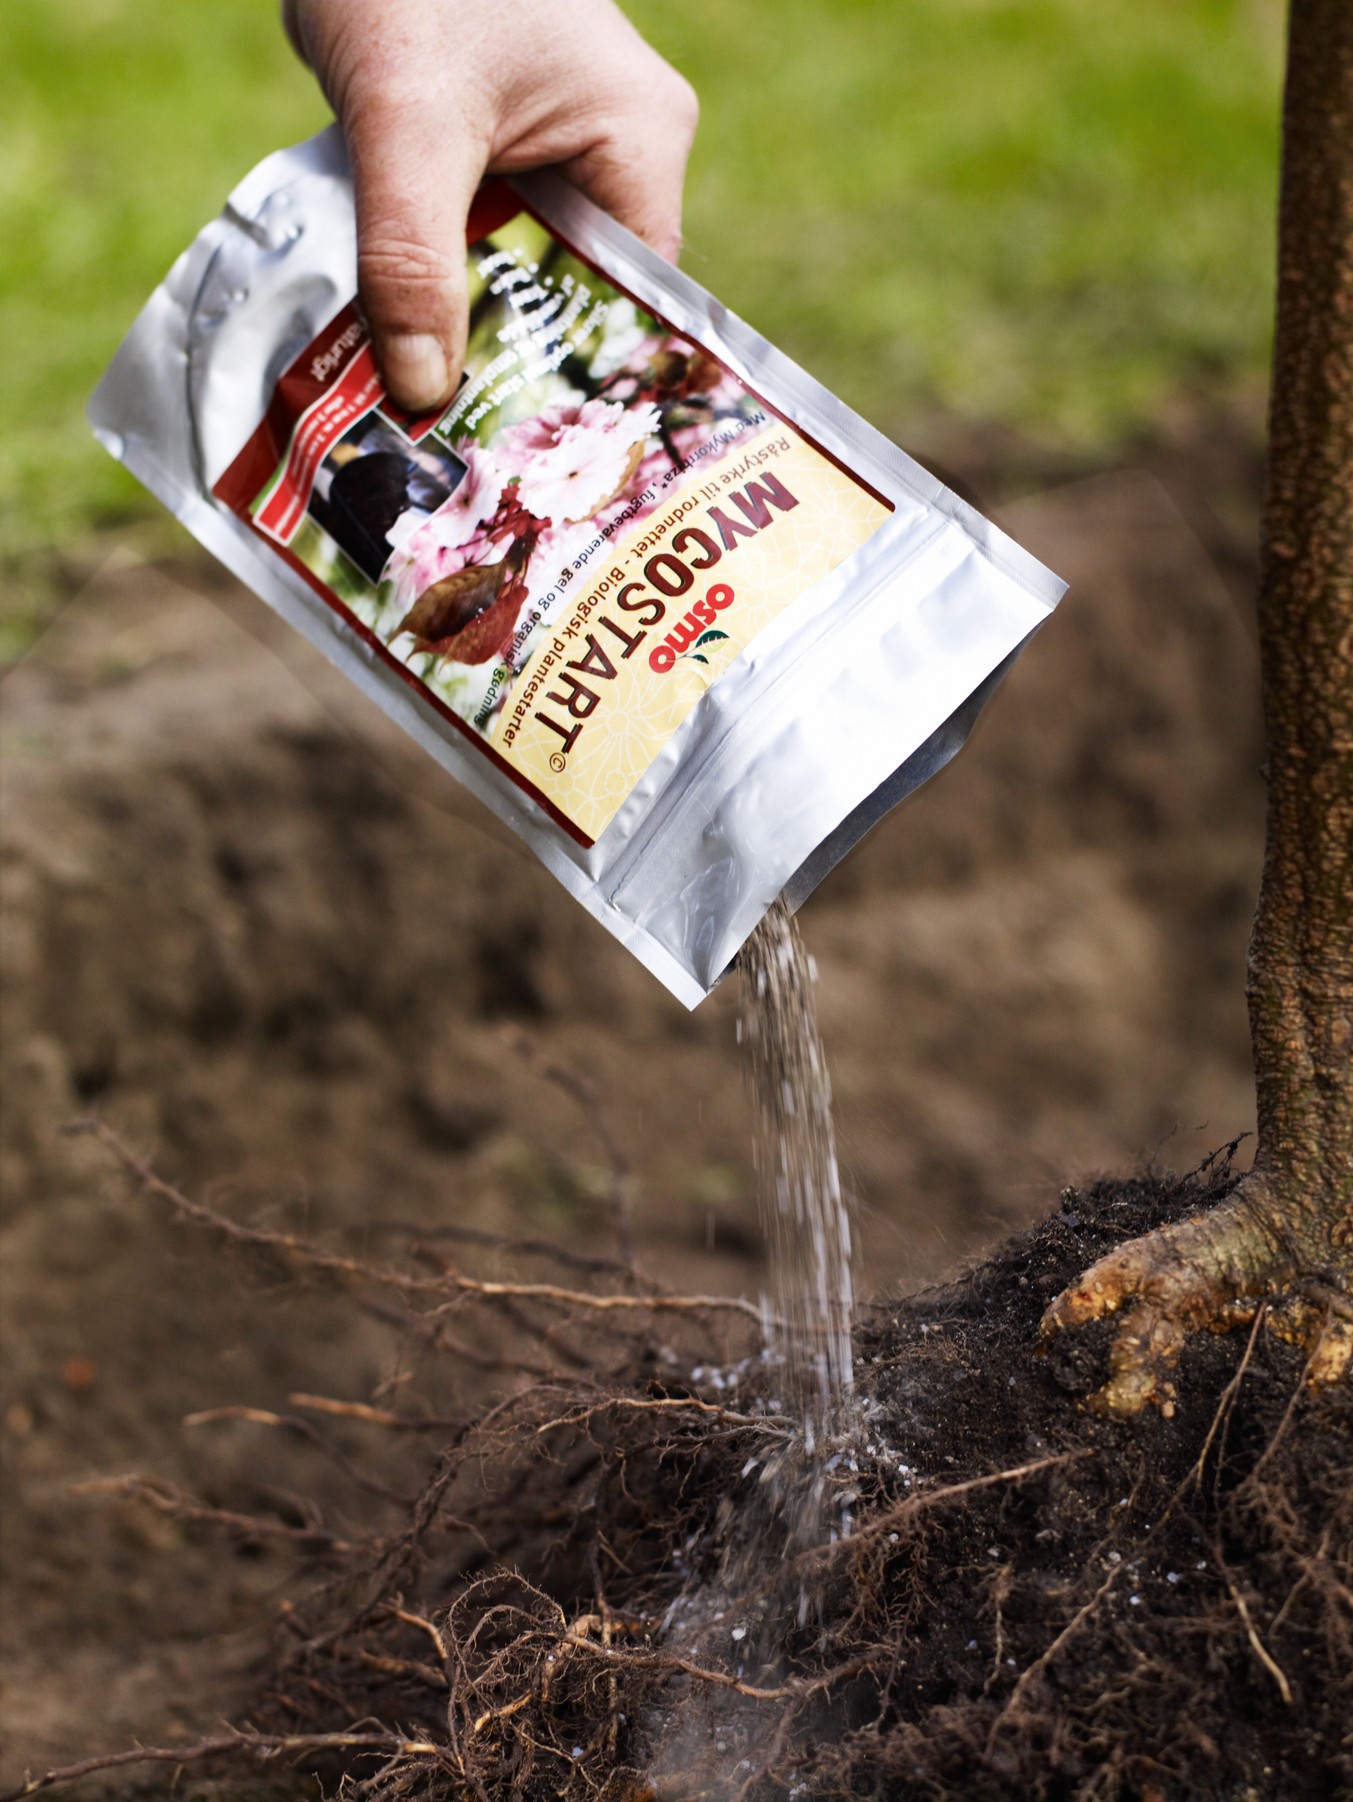 Mycorrhizal tree-planting products applied directly to the root system can help the tree to get started.